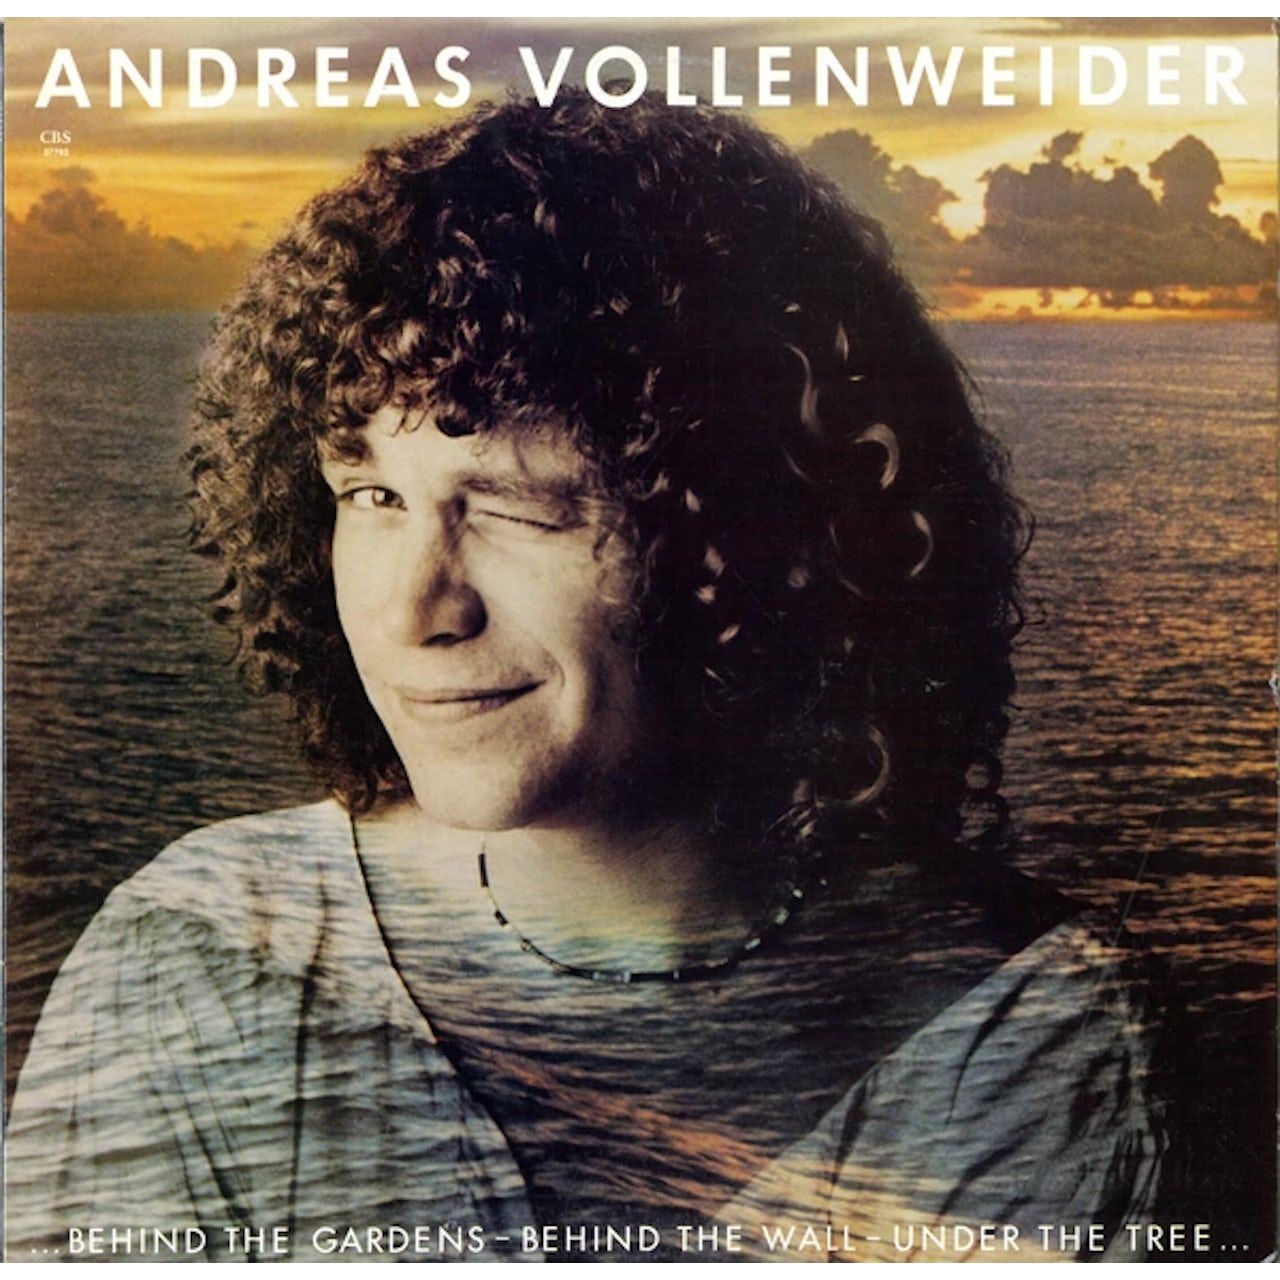 0885513022813, Виниловая пластинка Vollenweider, Andreas, Behind The Gardens - Behind The Wall - Under The Tree цена и фото